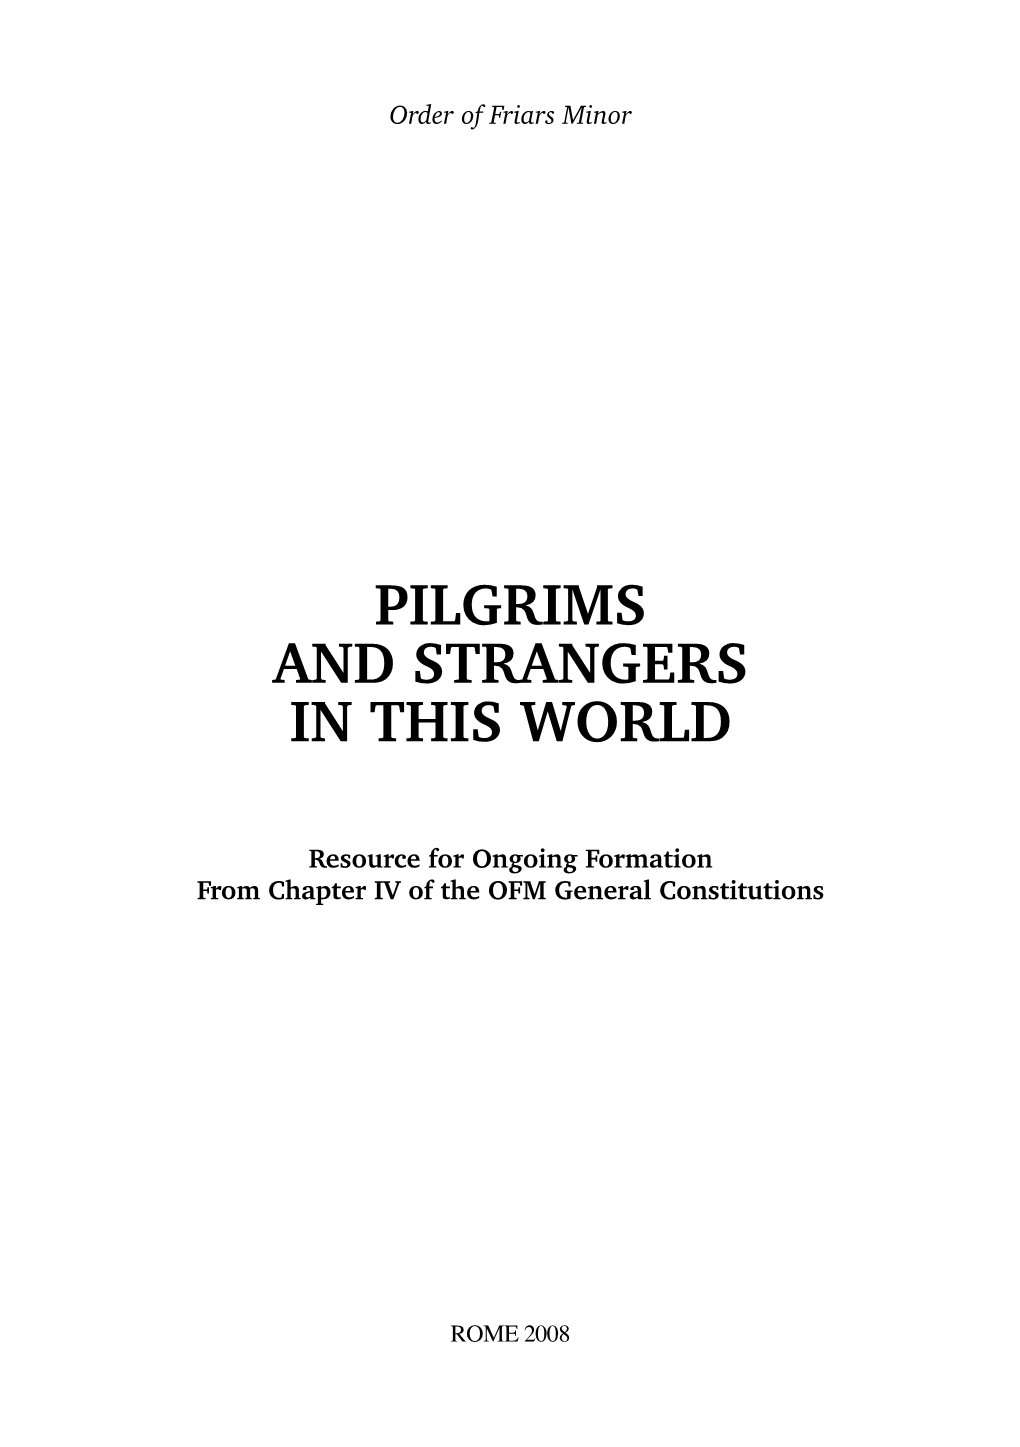 Pilgrims and Strangers in This World 1 Order of Friars Minor